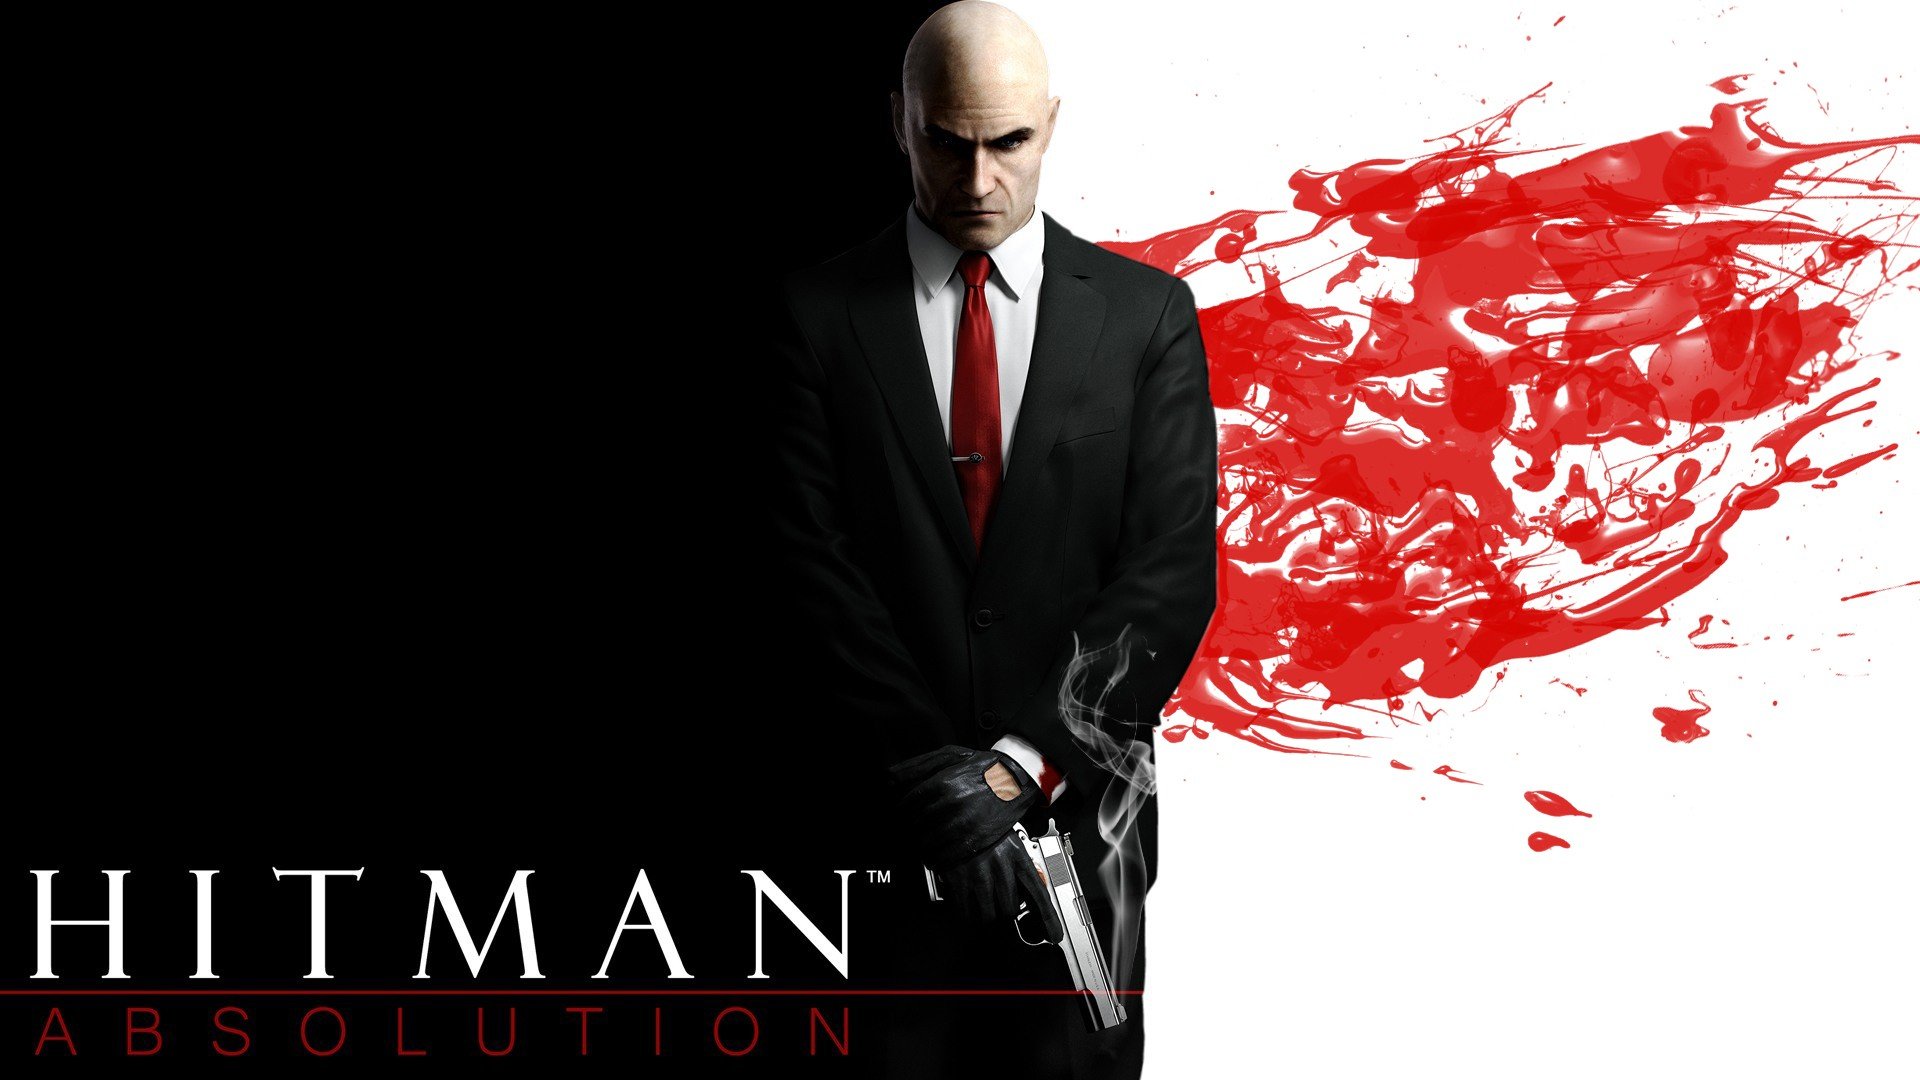 Agent 47, Hitman: Absolution, Blood, Red, Red tie Wallpaper